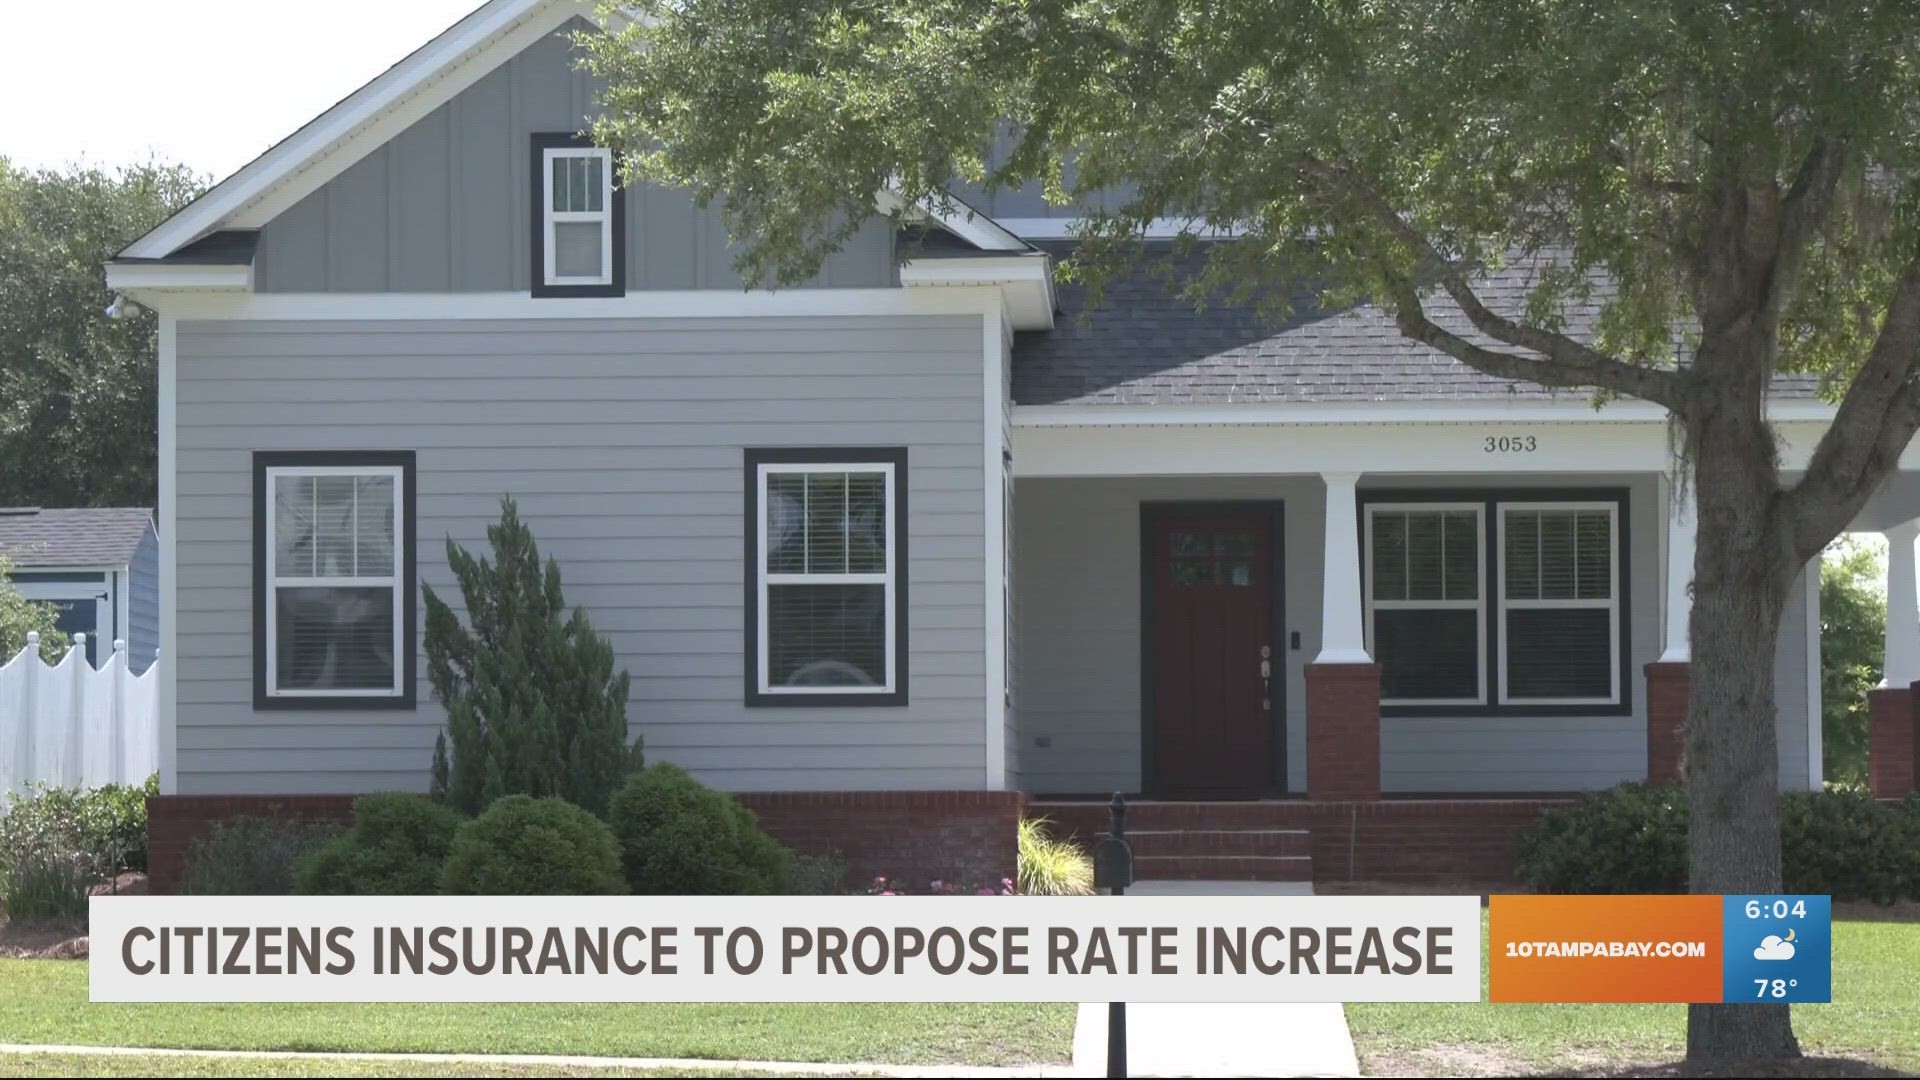 Earlier in the year, state regulators ordered Citizens to redo it's rate hike proposal, lowering its proposed rates.